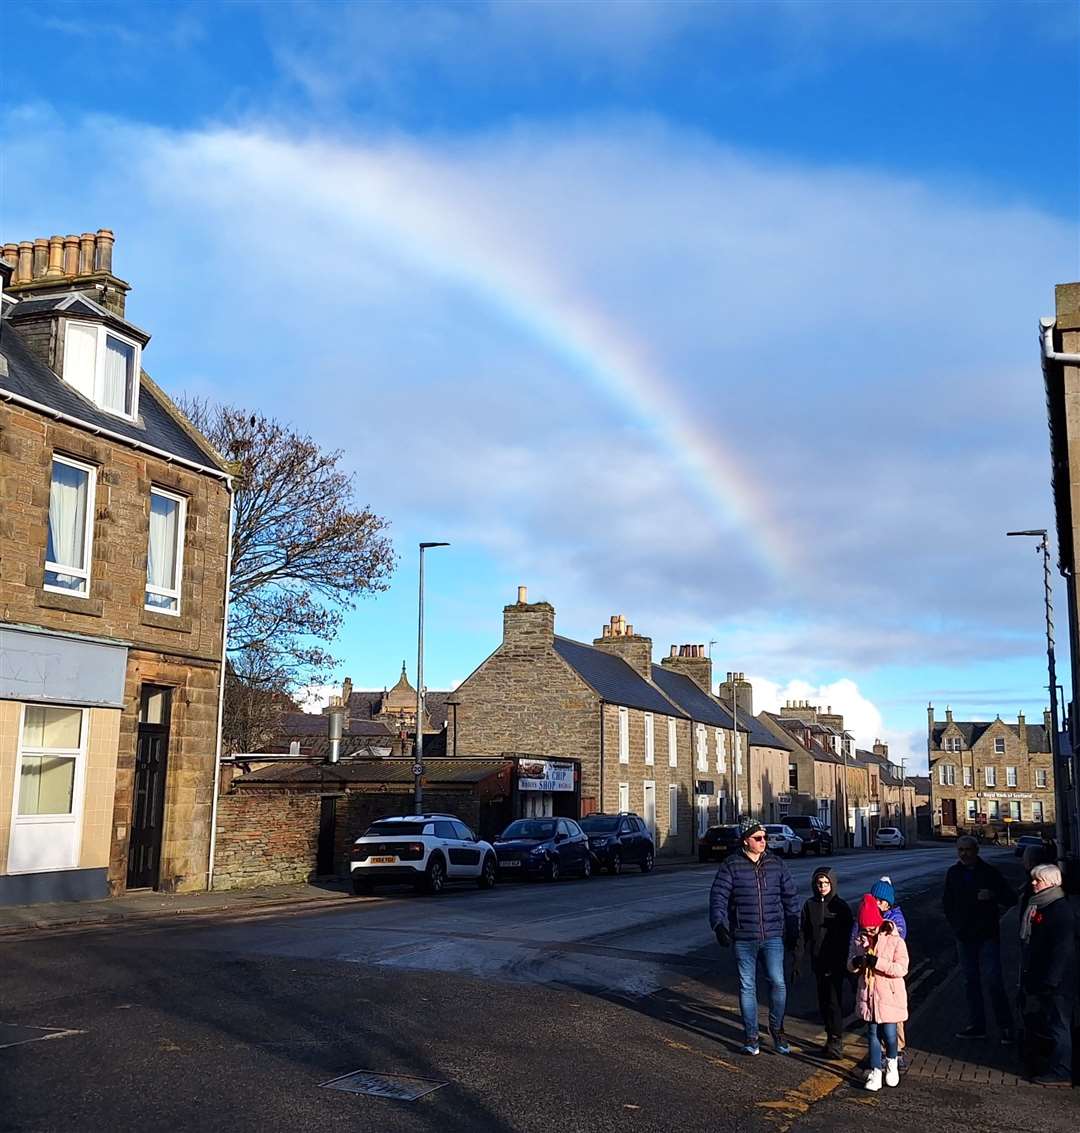 A rainbow appears like a ray of hope at the end of the parade. Picture: DGS